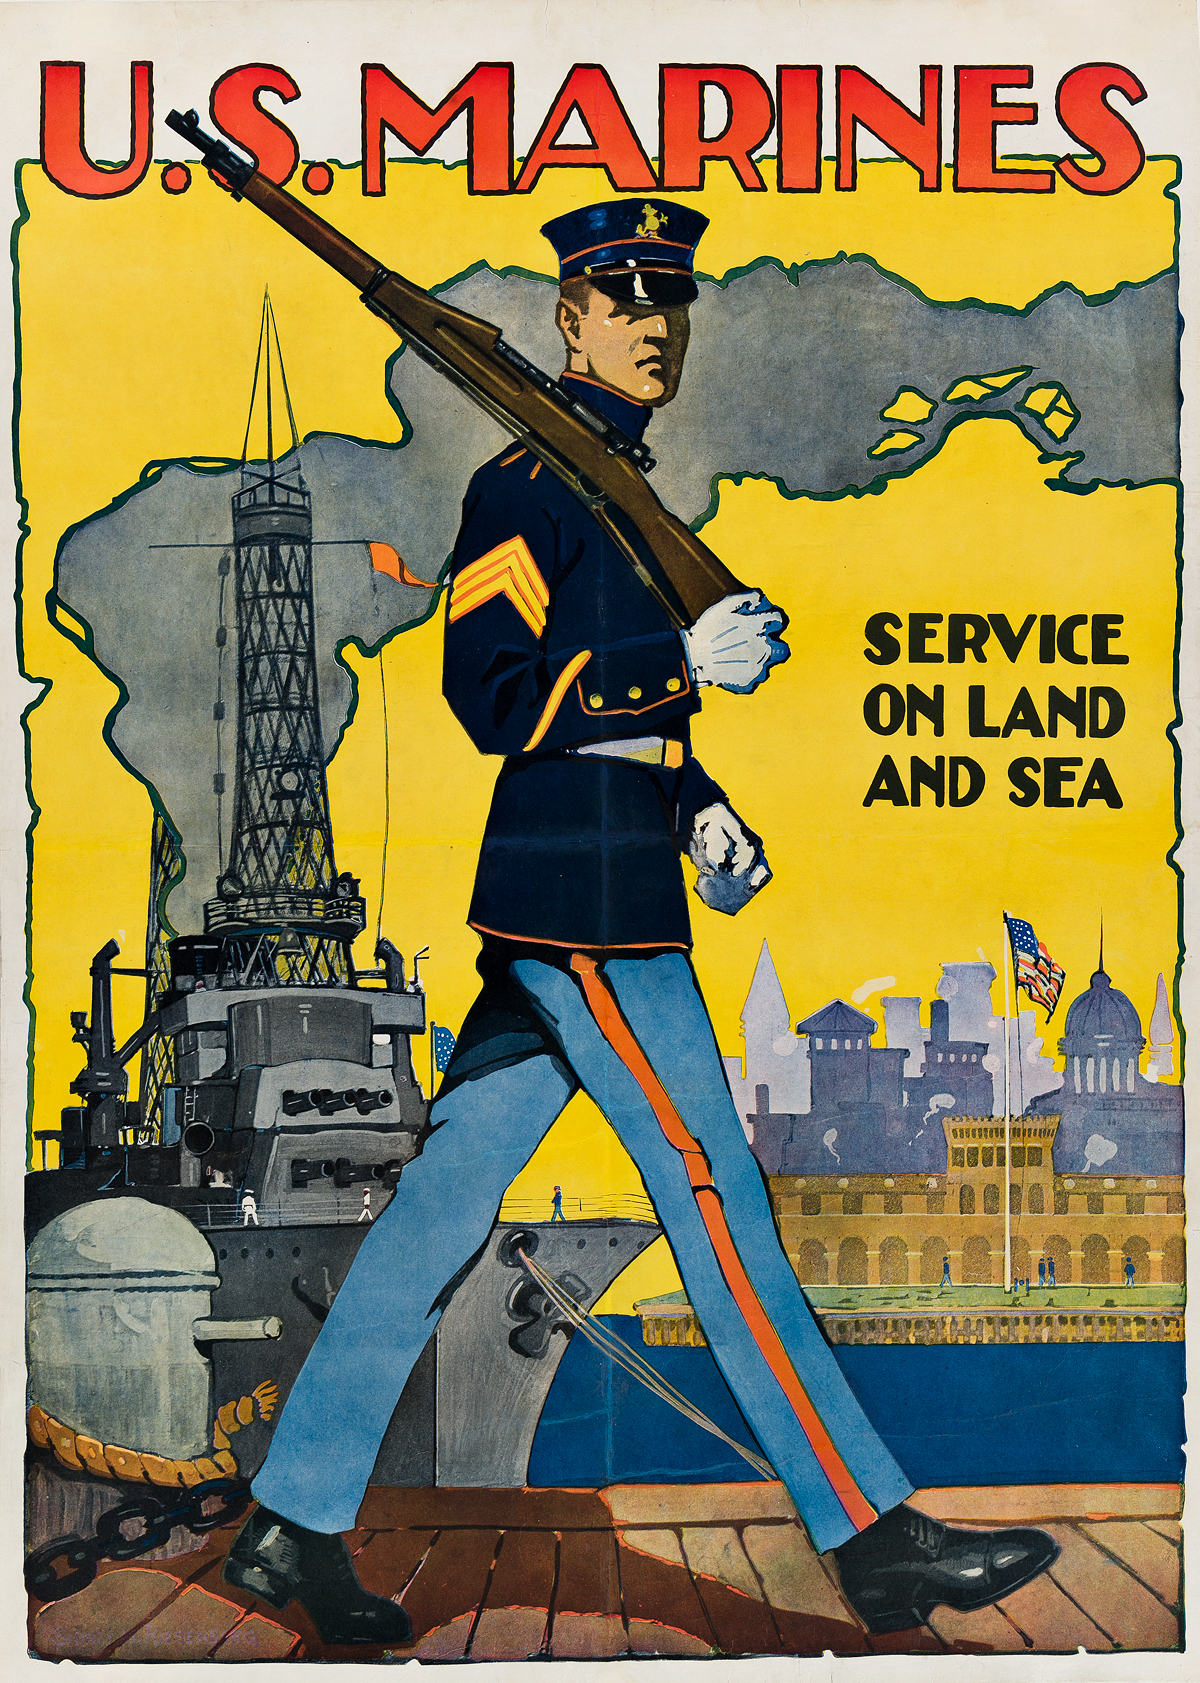 SIDNEY H. RIESENBERG (1885-1972). U.S. MARINES / SERVICE ON LAND AND SEA. 1917. 35x25 inches, 90x64 cm.